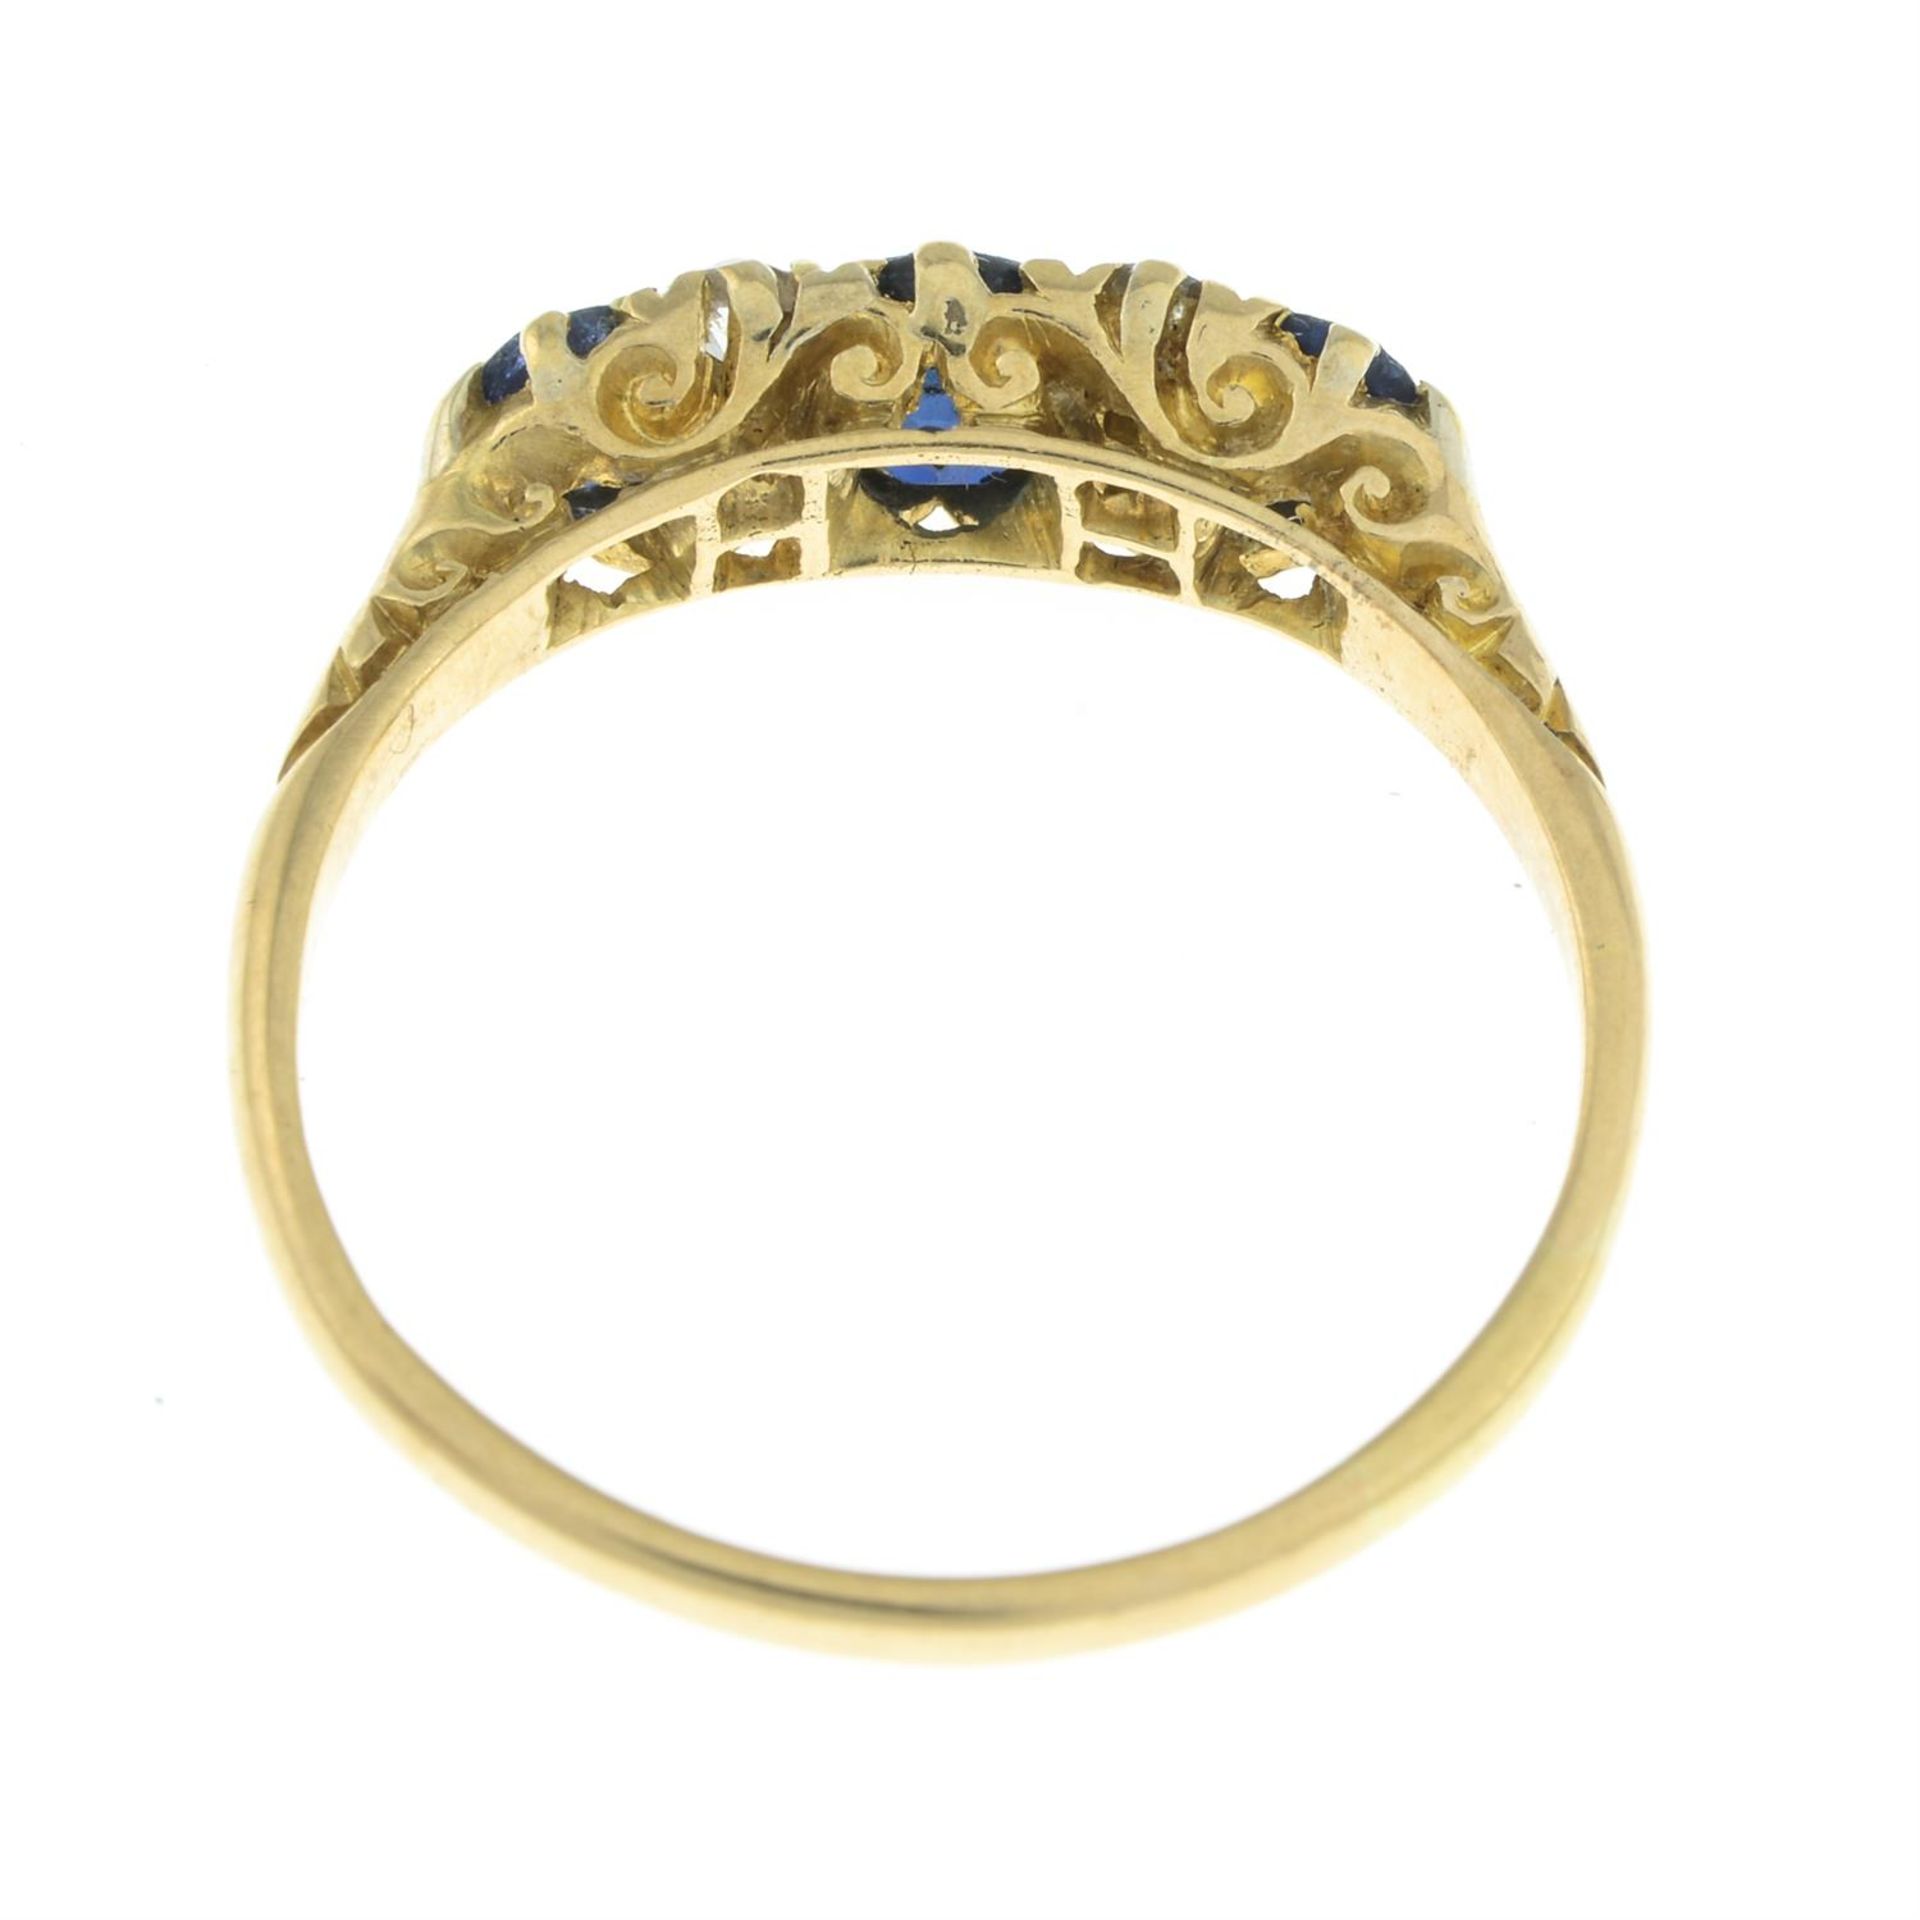 Early 20th century 18ct gold sapphire & diamond ring - Image 2 of 2